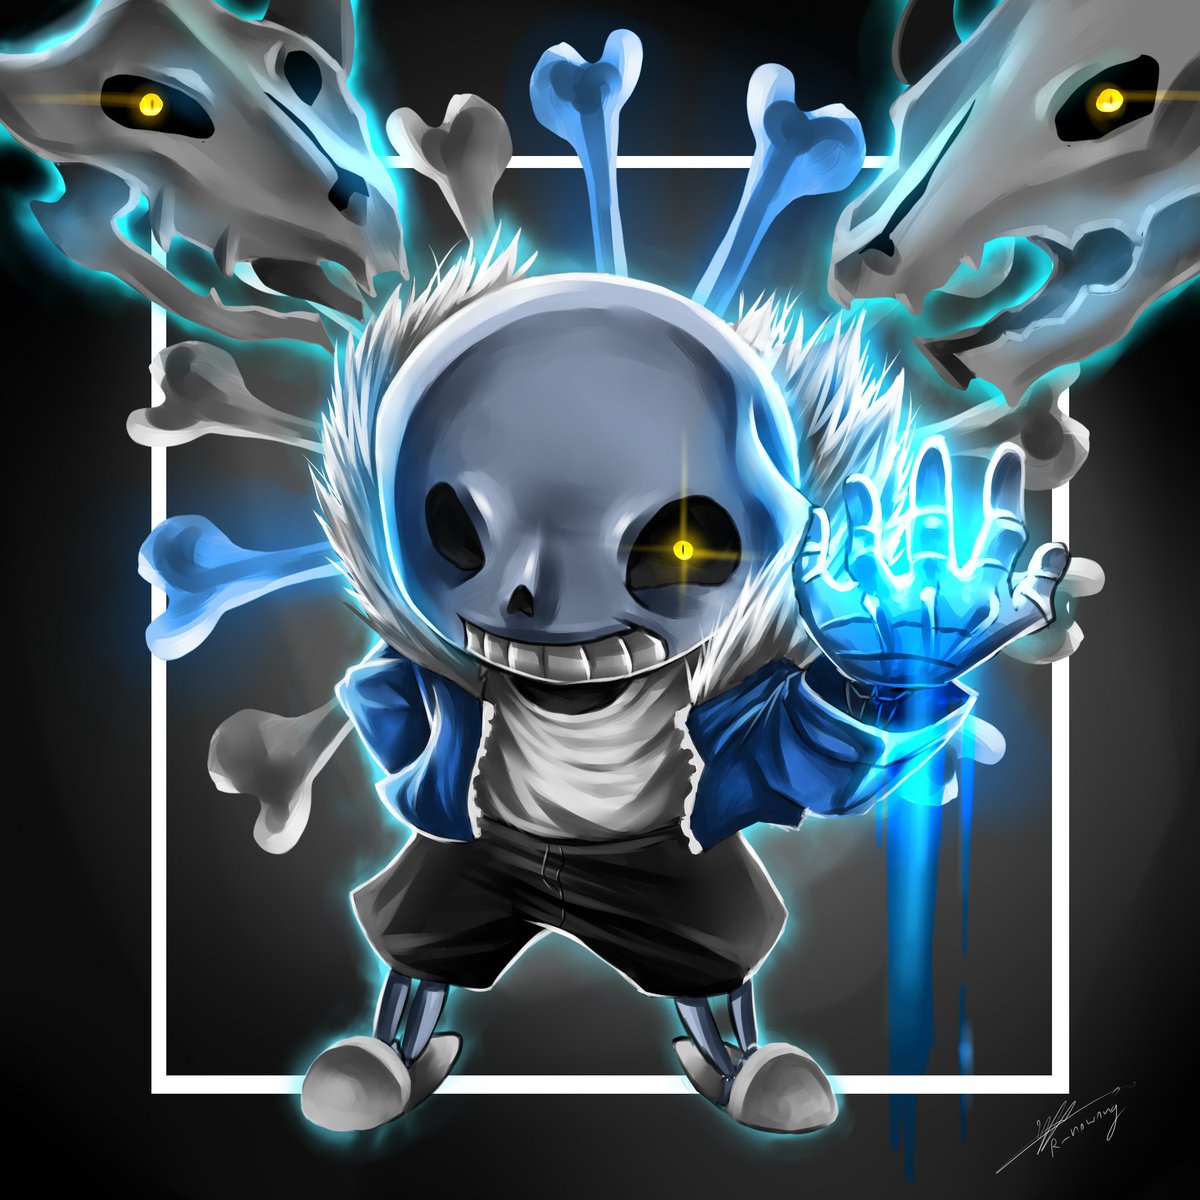 R Nowong The Lazy Fanart Sans From Undertale This Game Is Awesome And Have A Great Story Art By Me Undertale Sans Art T Co Fu90iudq1s Twitter